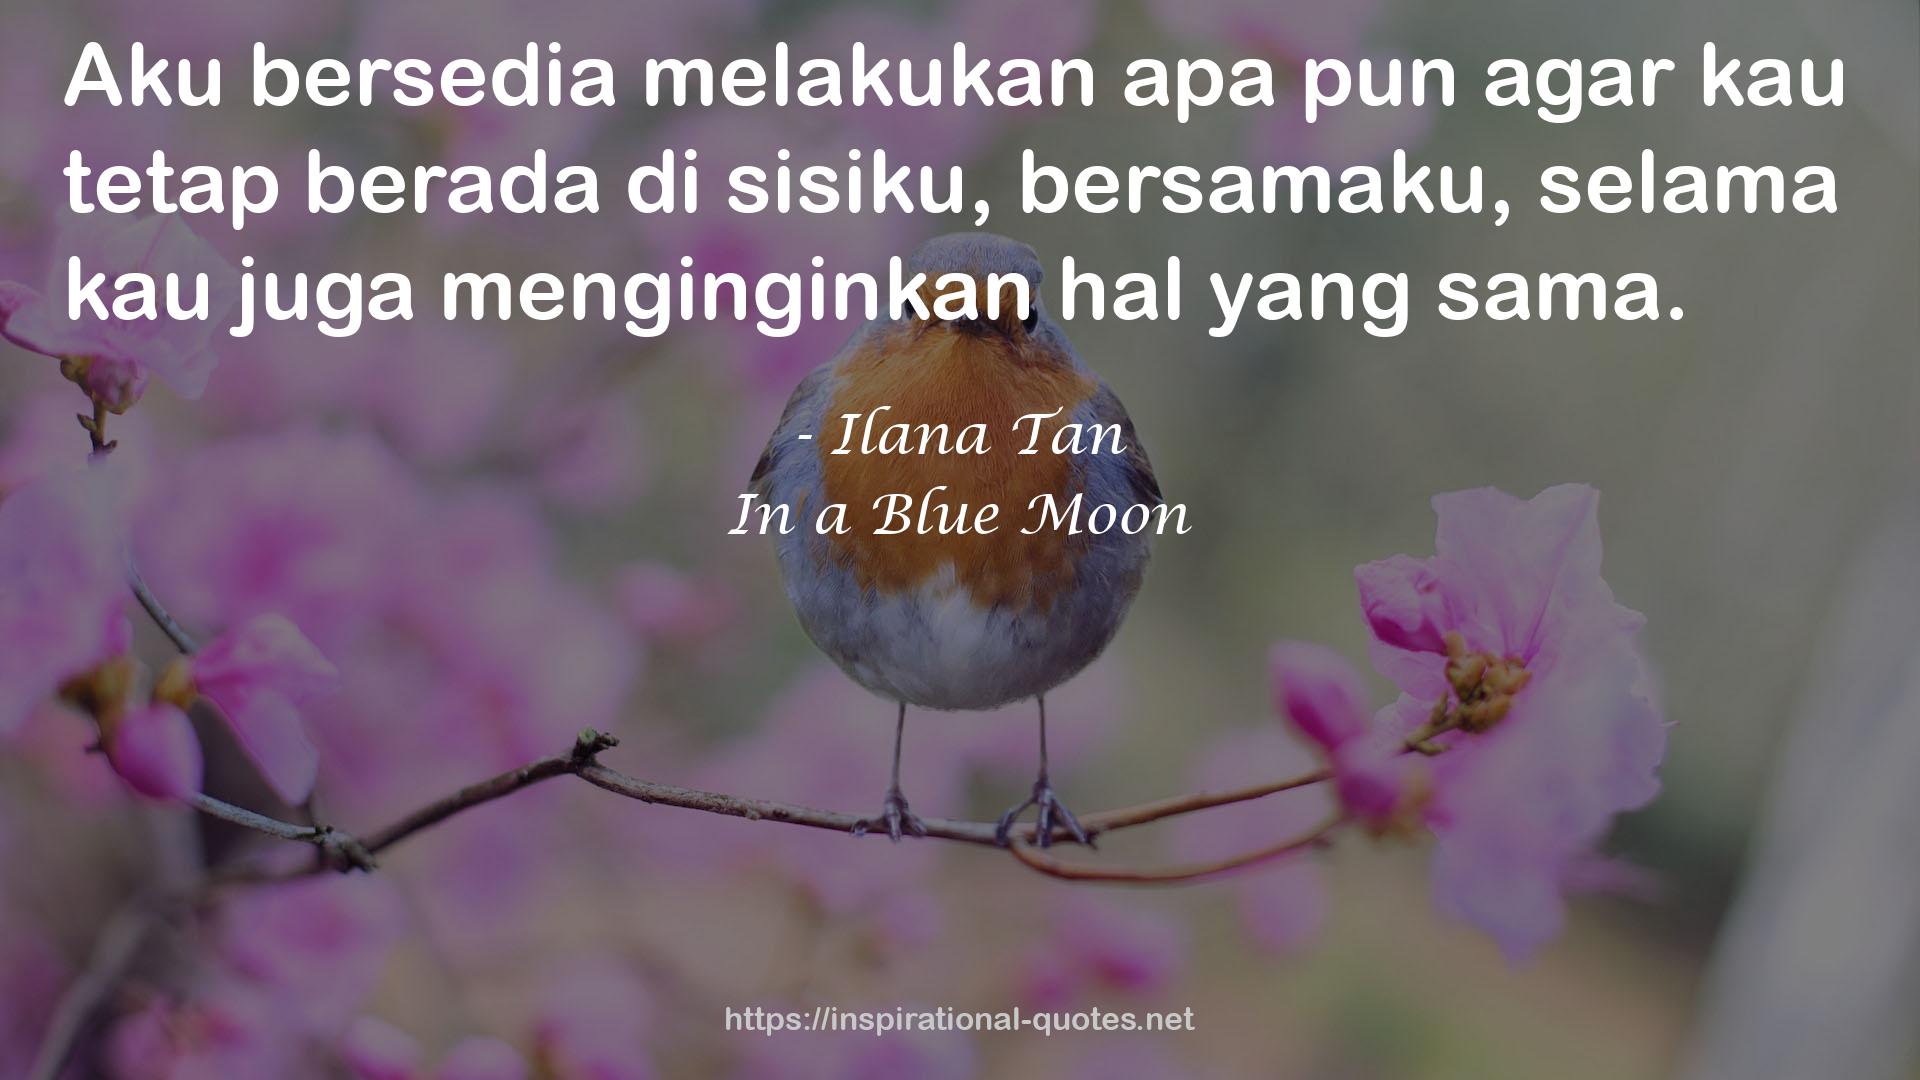 In a Blue Moon QUOTES